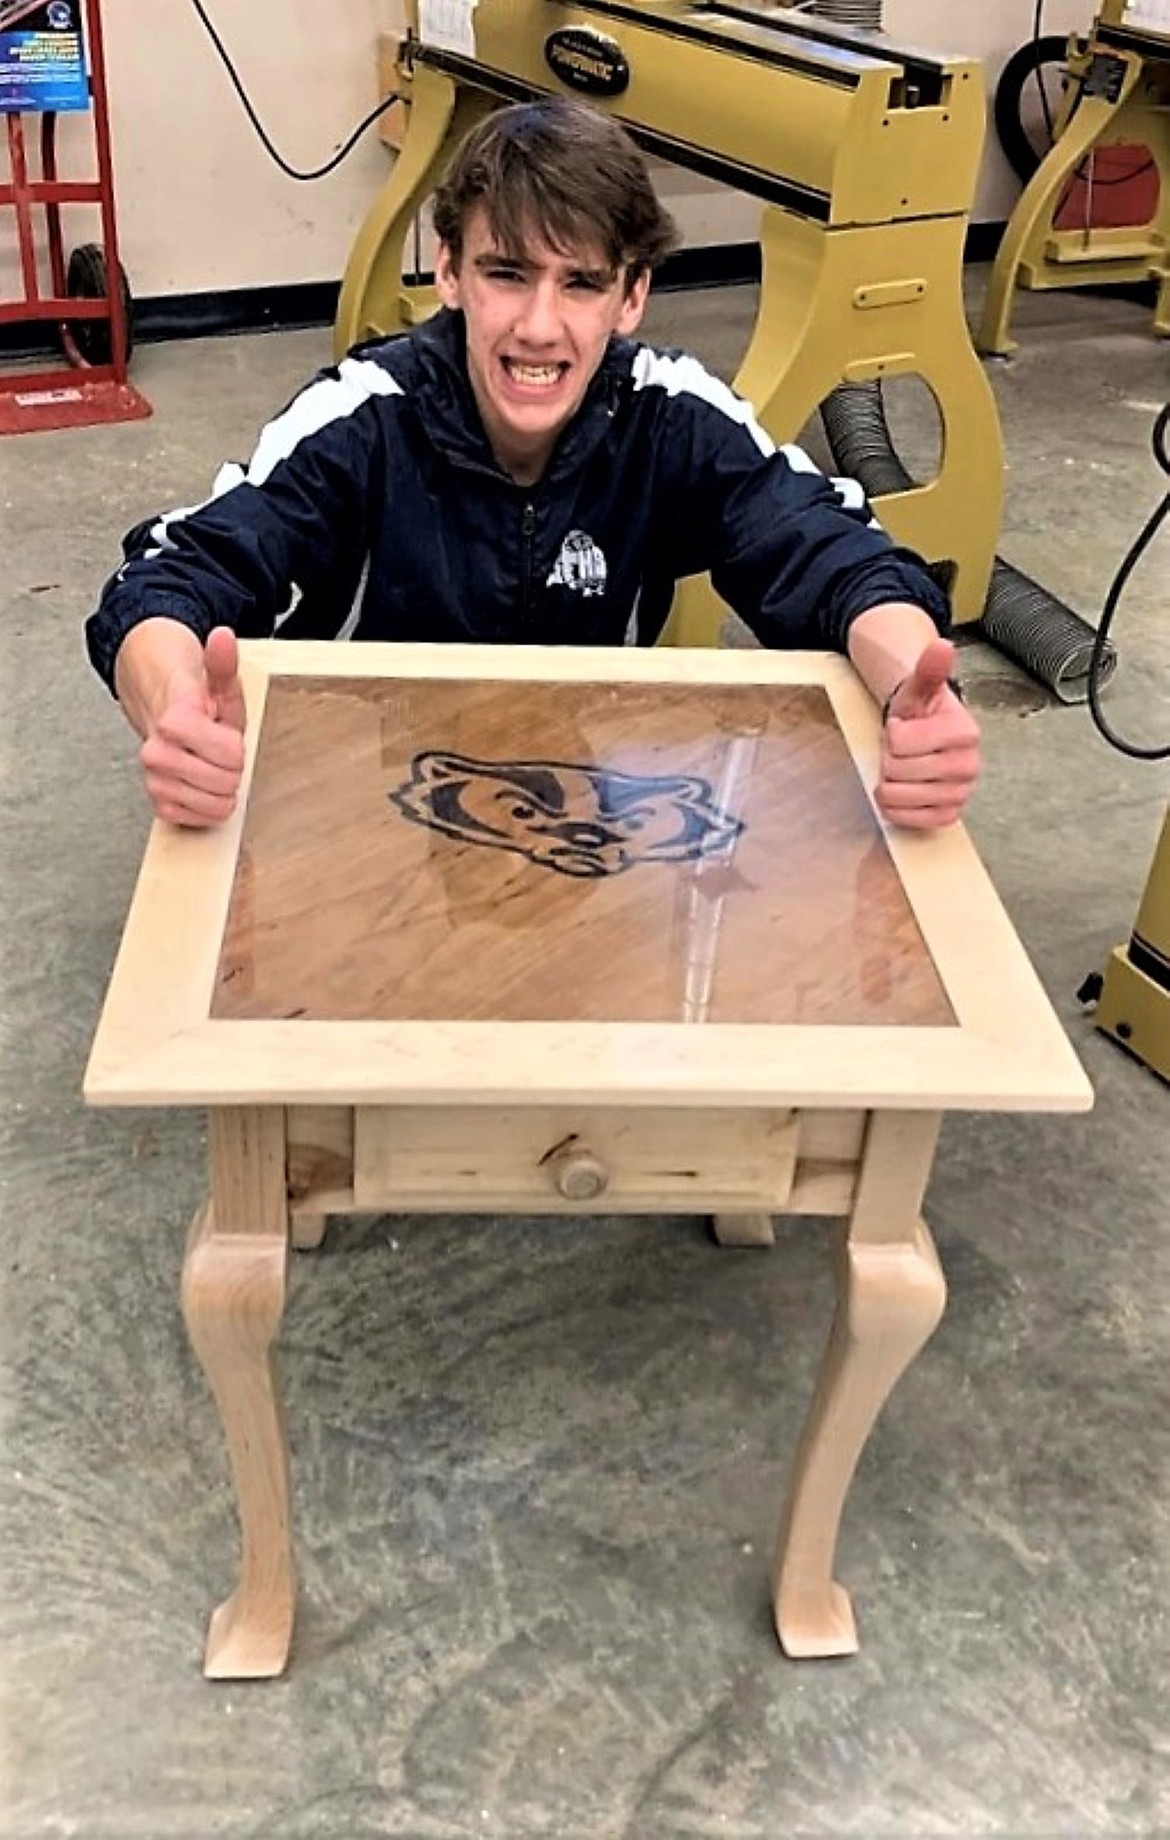 Connor Alexander, the spirited Badger that he is, inlaid a Badger head to reflect his school pride on the top of his table.